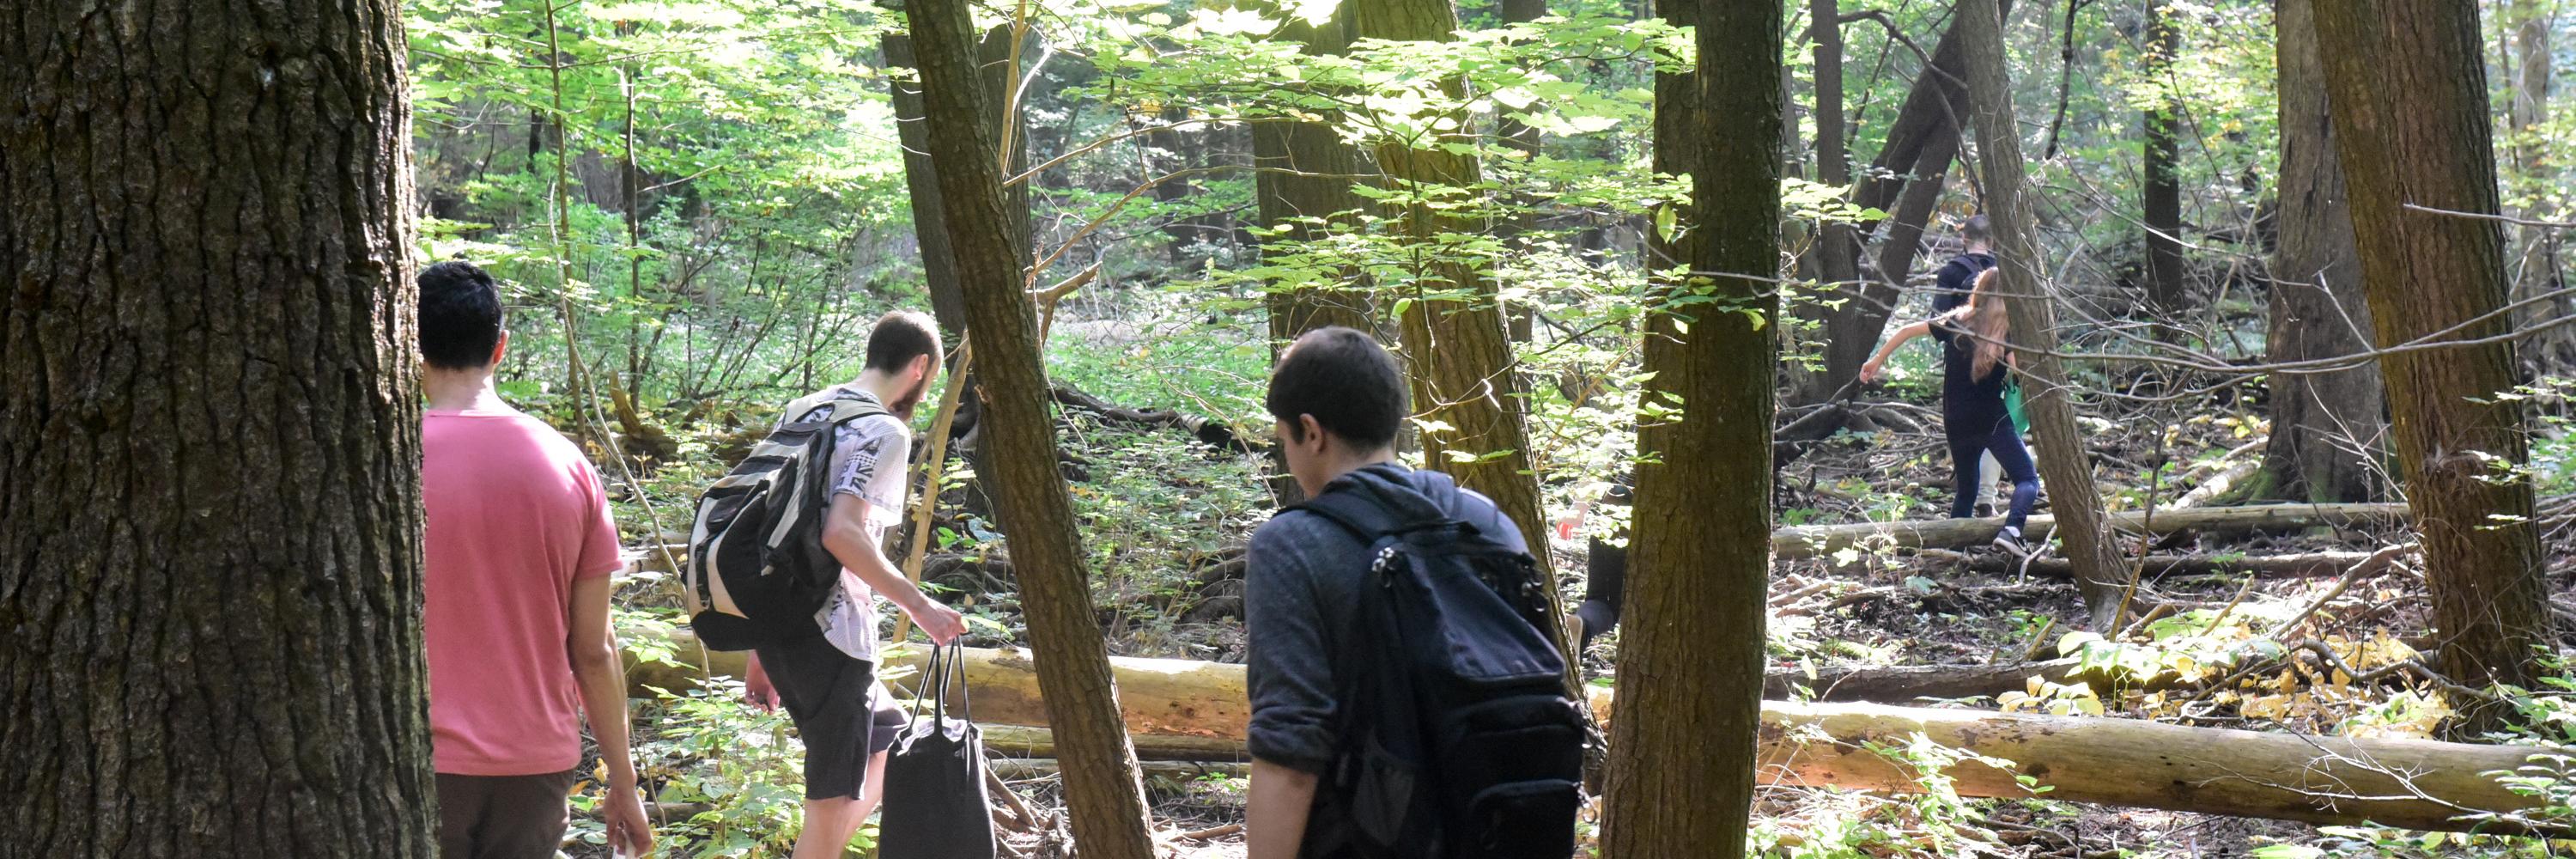 Three students walk through the Valley forest